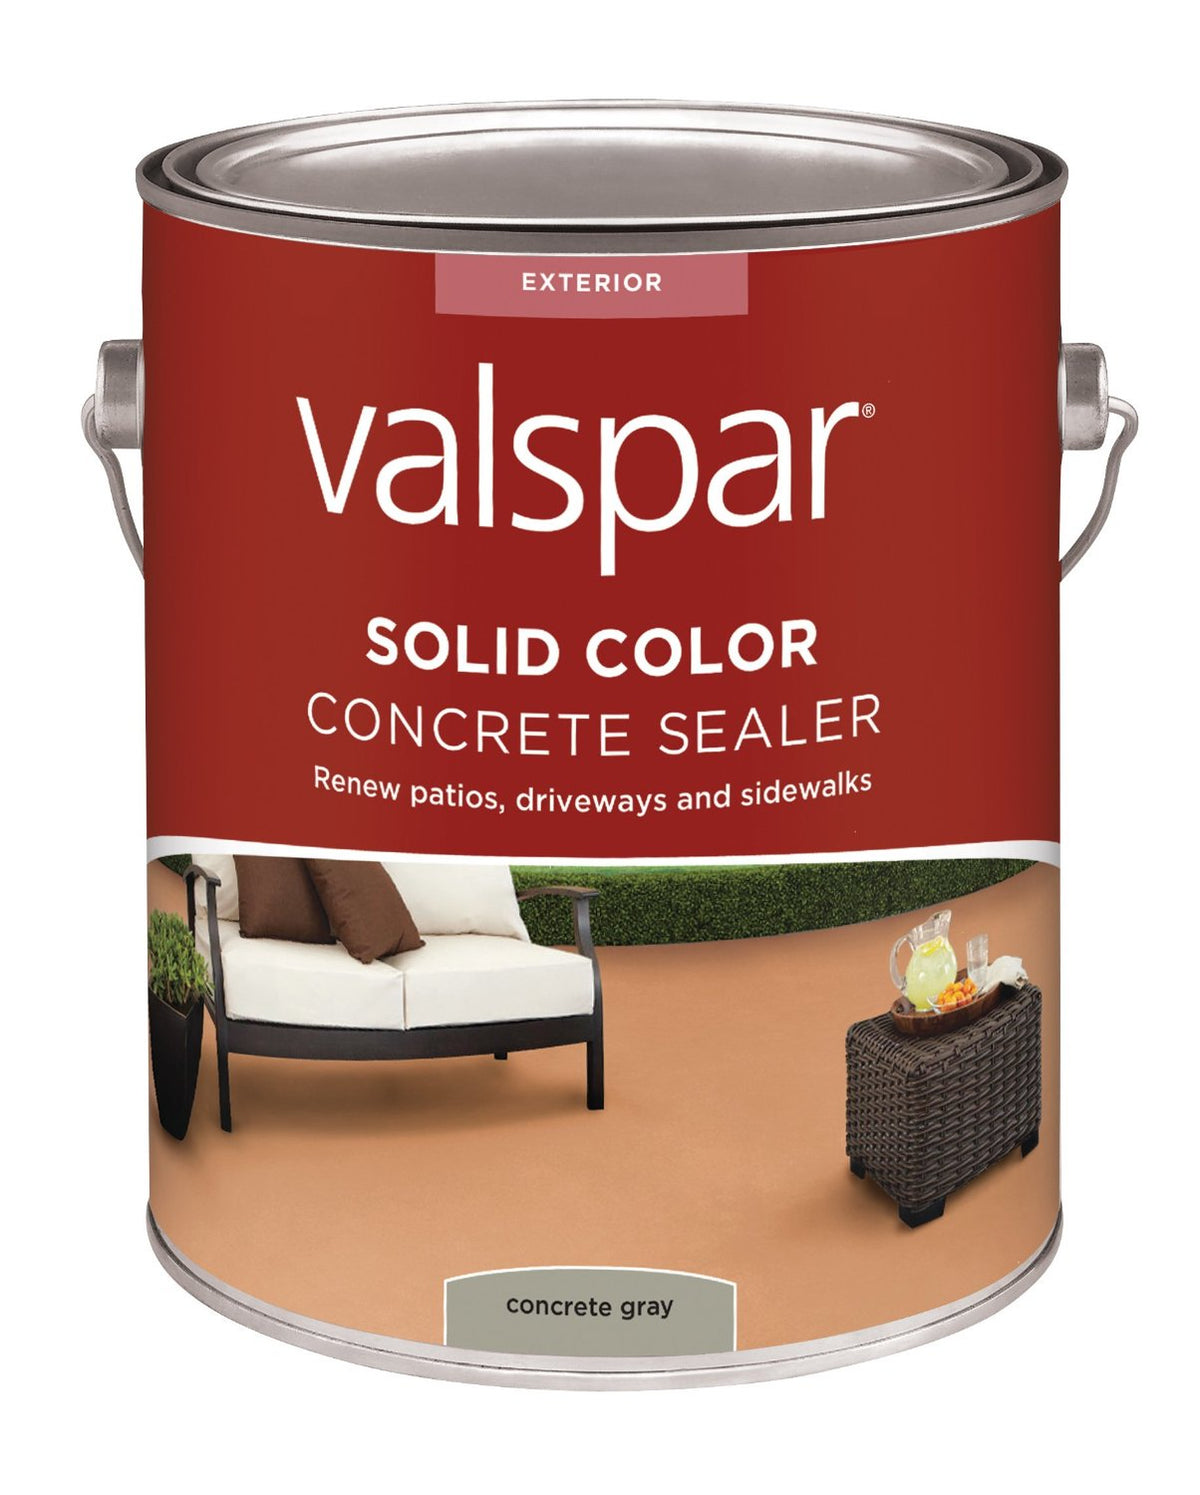 buy masonry sealers at cheap rate in bulk. wholesale & retail paint & painting supplies store. home décor ideas, maintenance, repair replacement parts